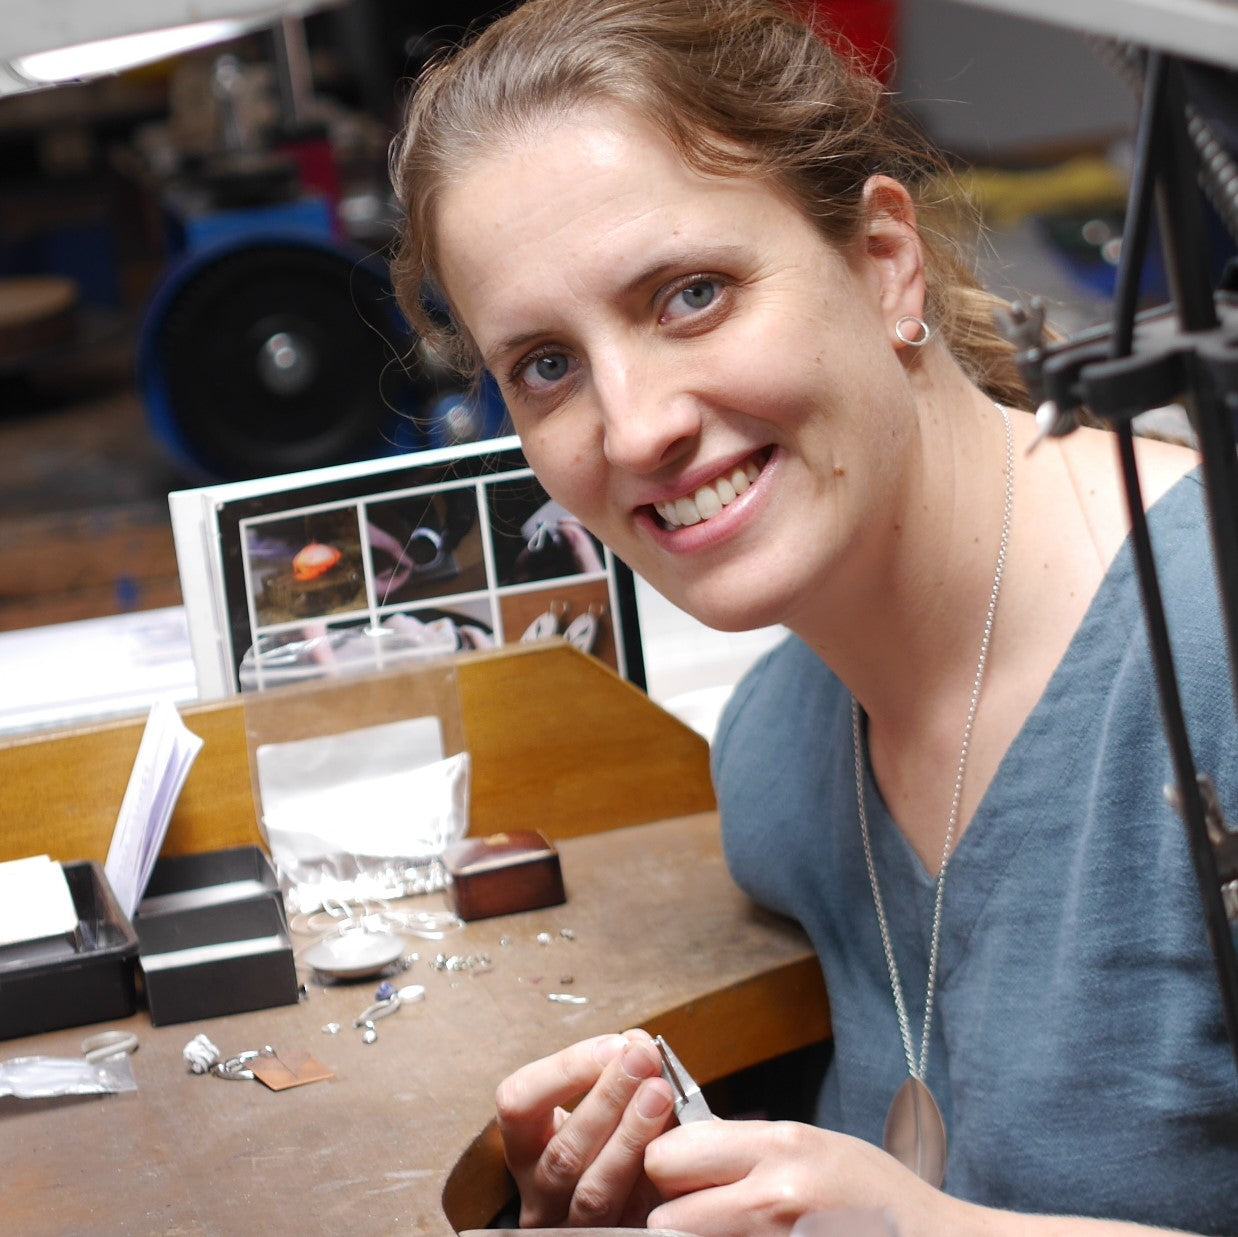 Louise Mary jewellery and silversmithing tutor Derbyshire